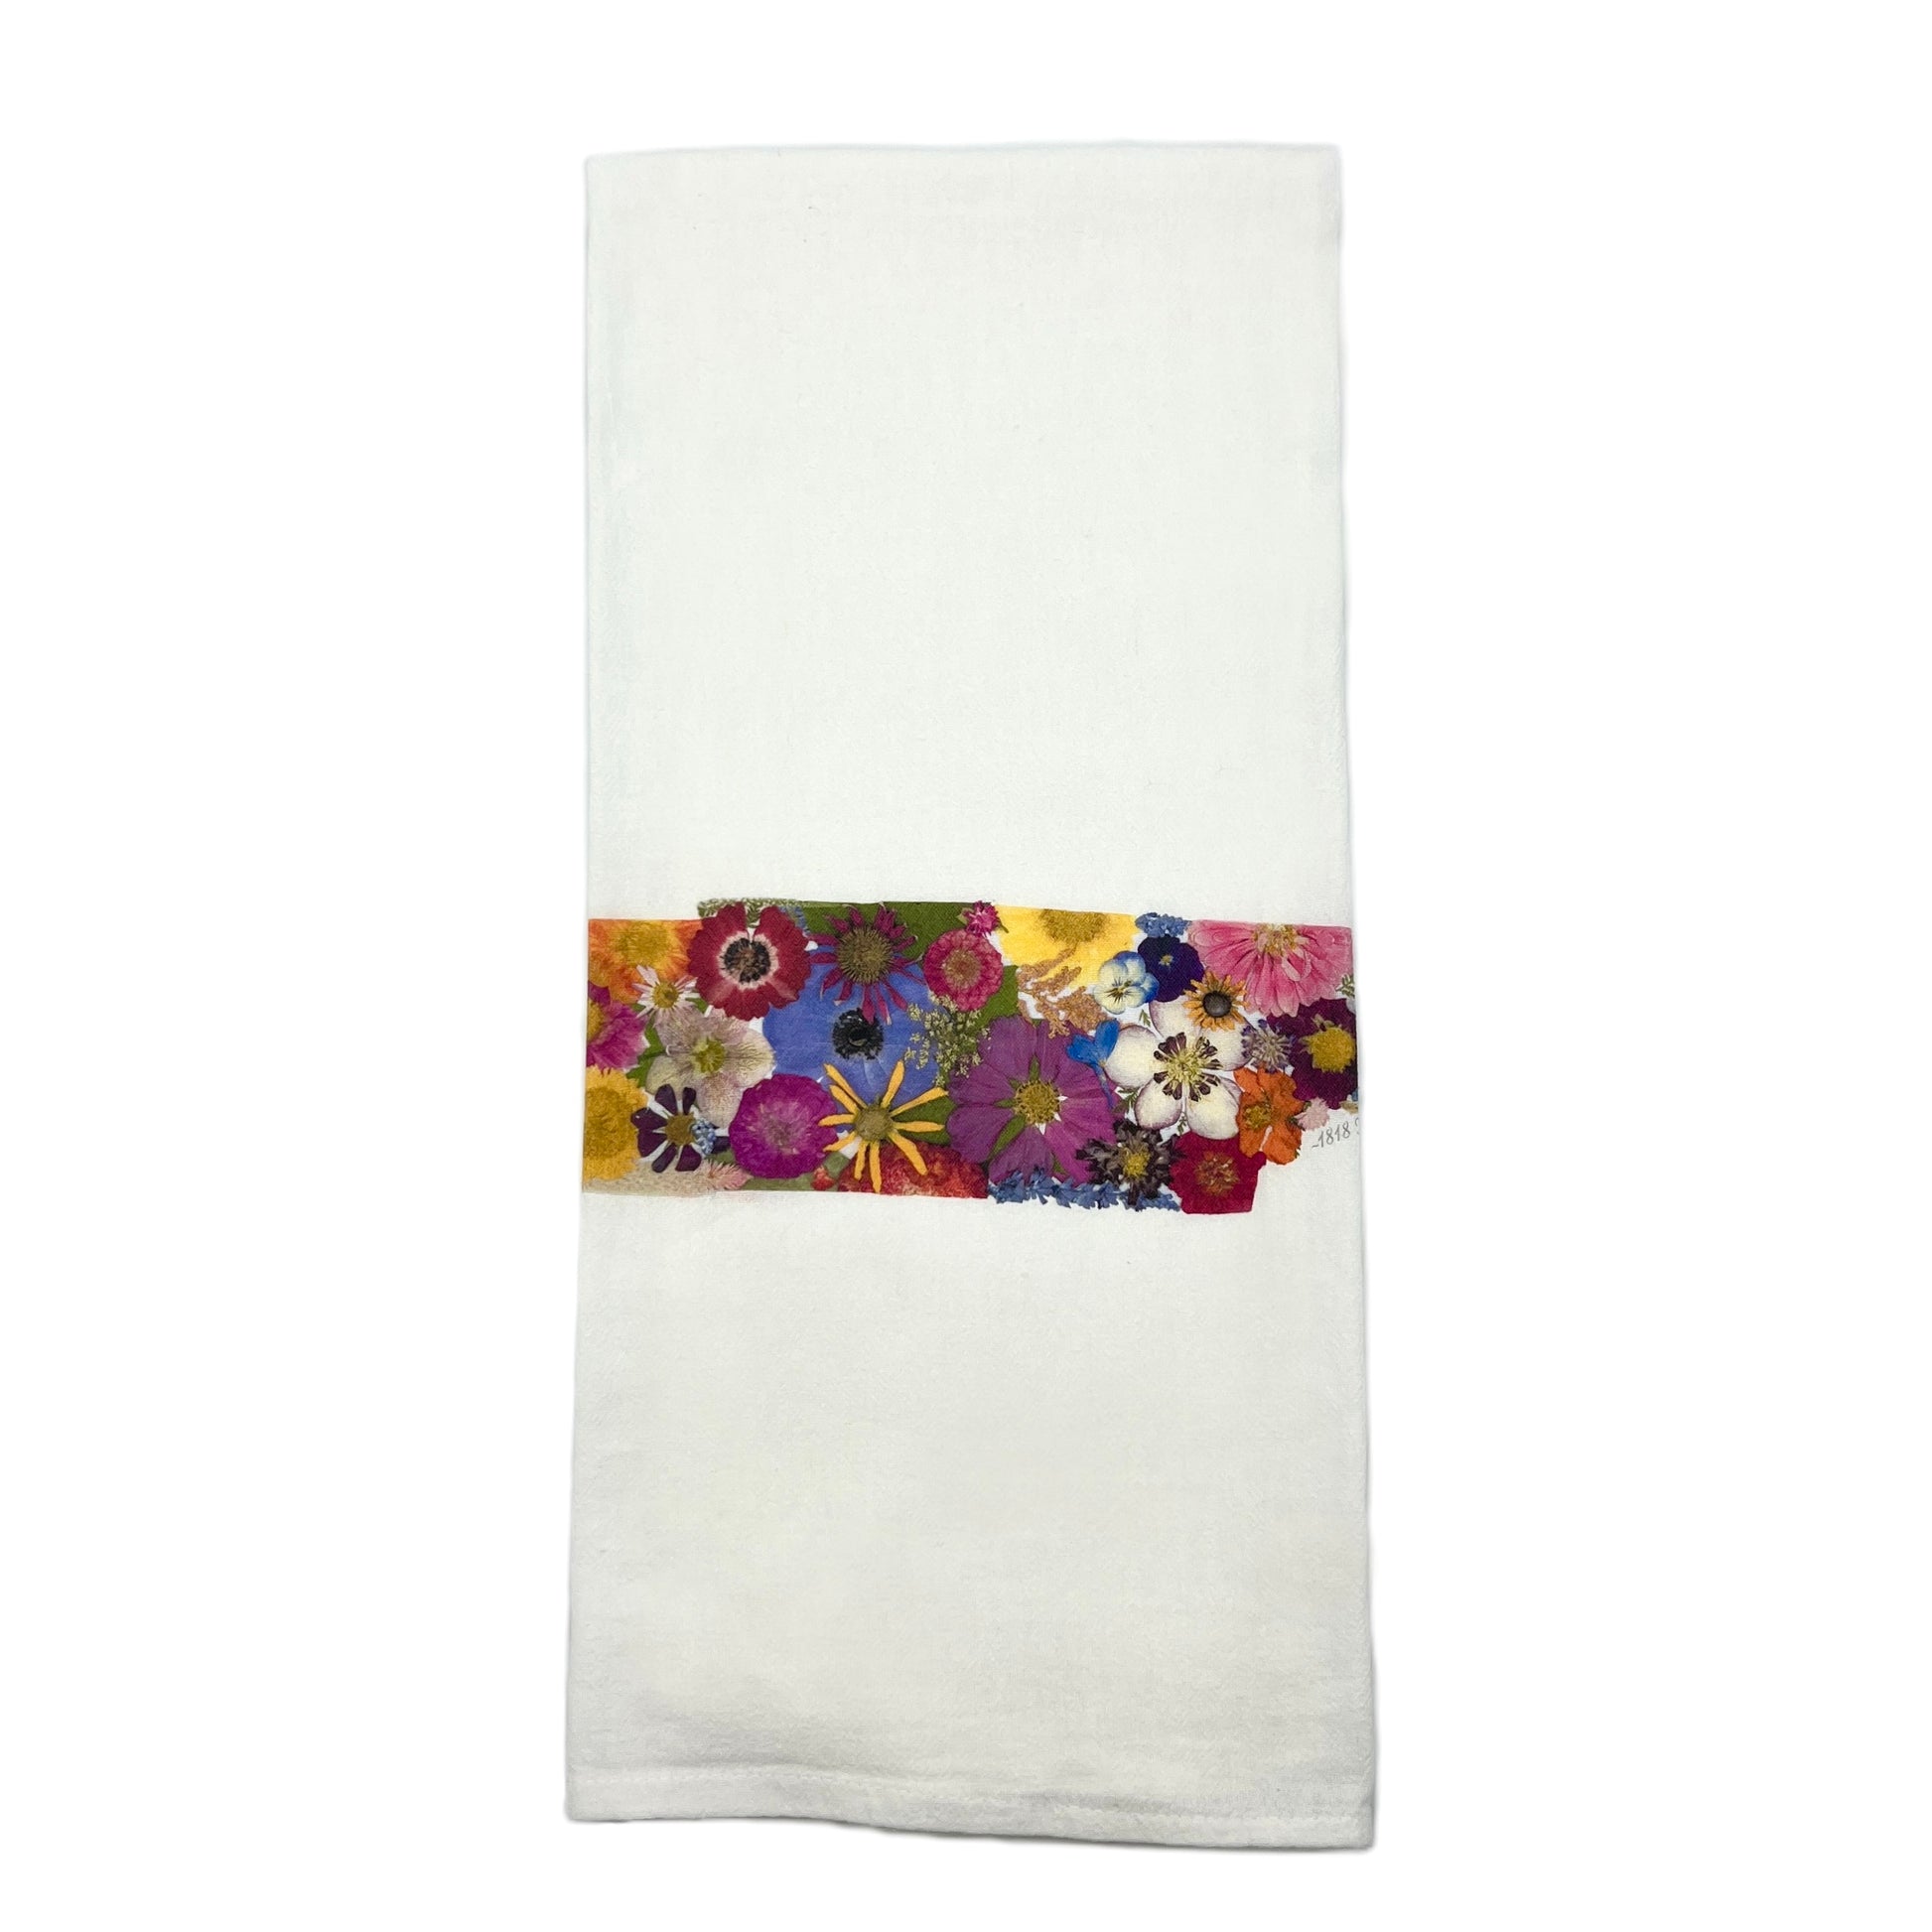 Tennessee Themed Flour Sack Towel Featuring Dried, Pressed Flowers - "Where I Bloom" Collection Towel 1818 Farms   